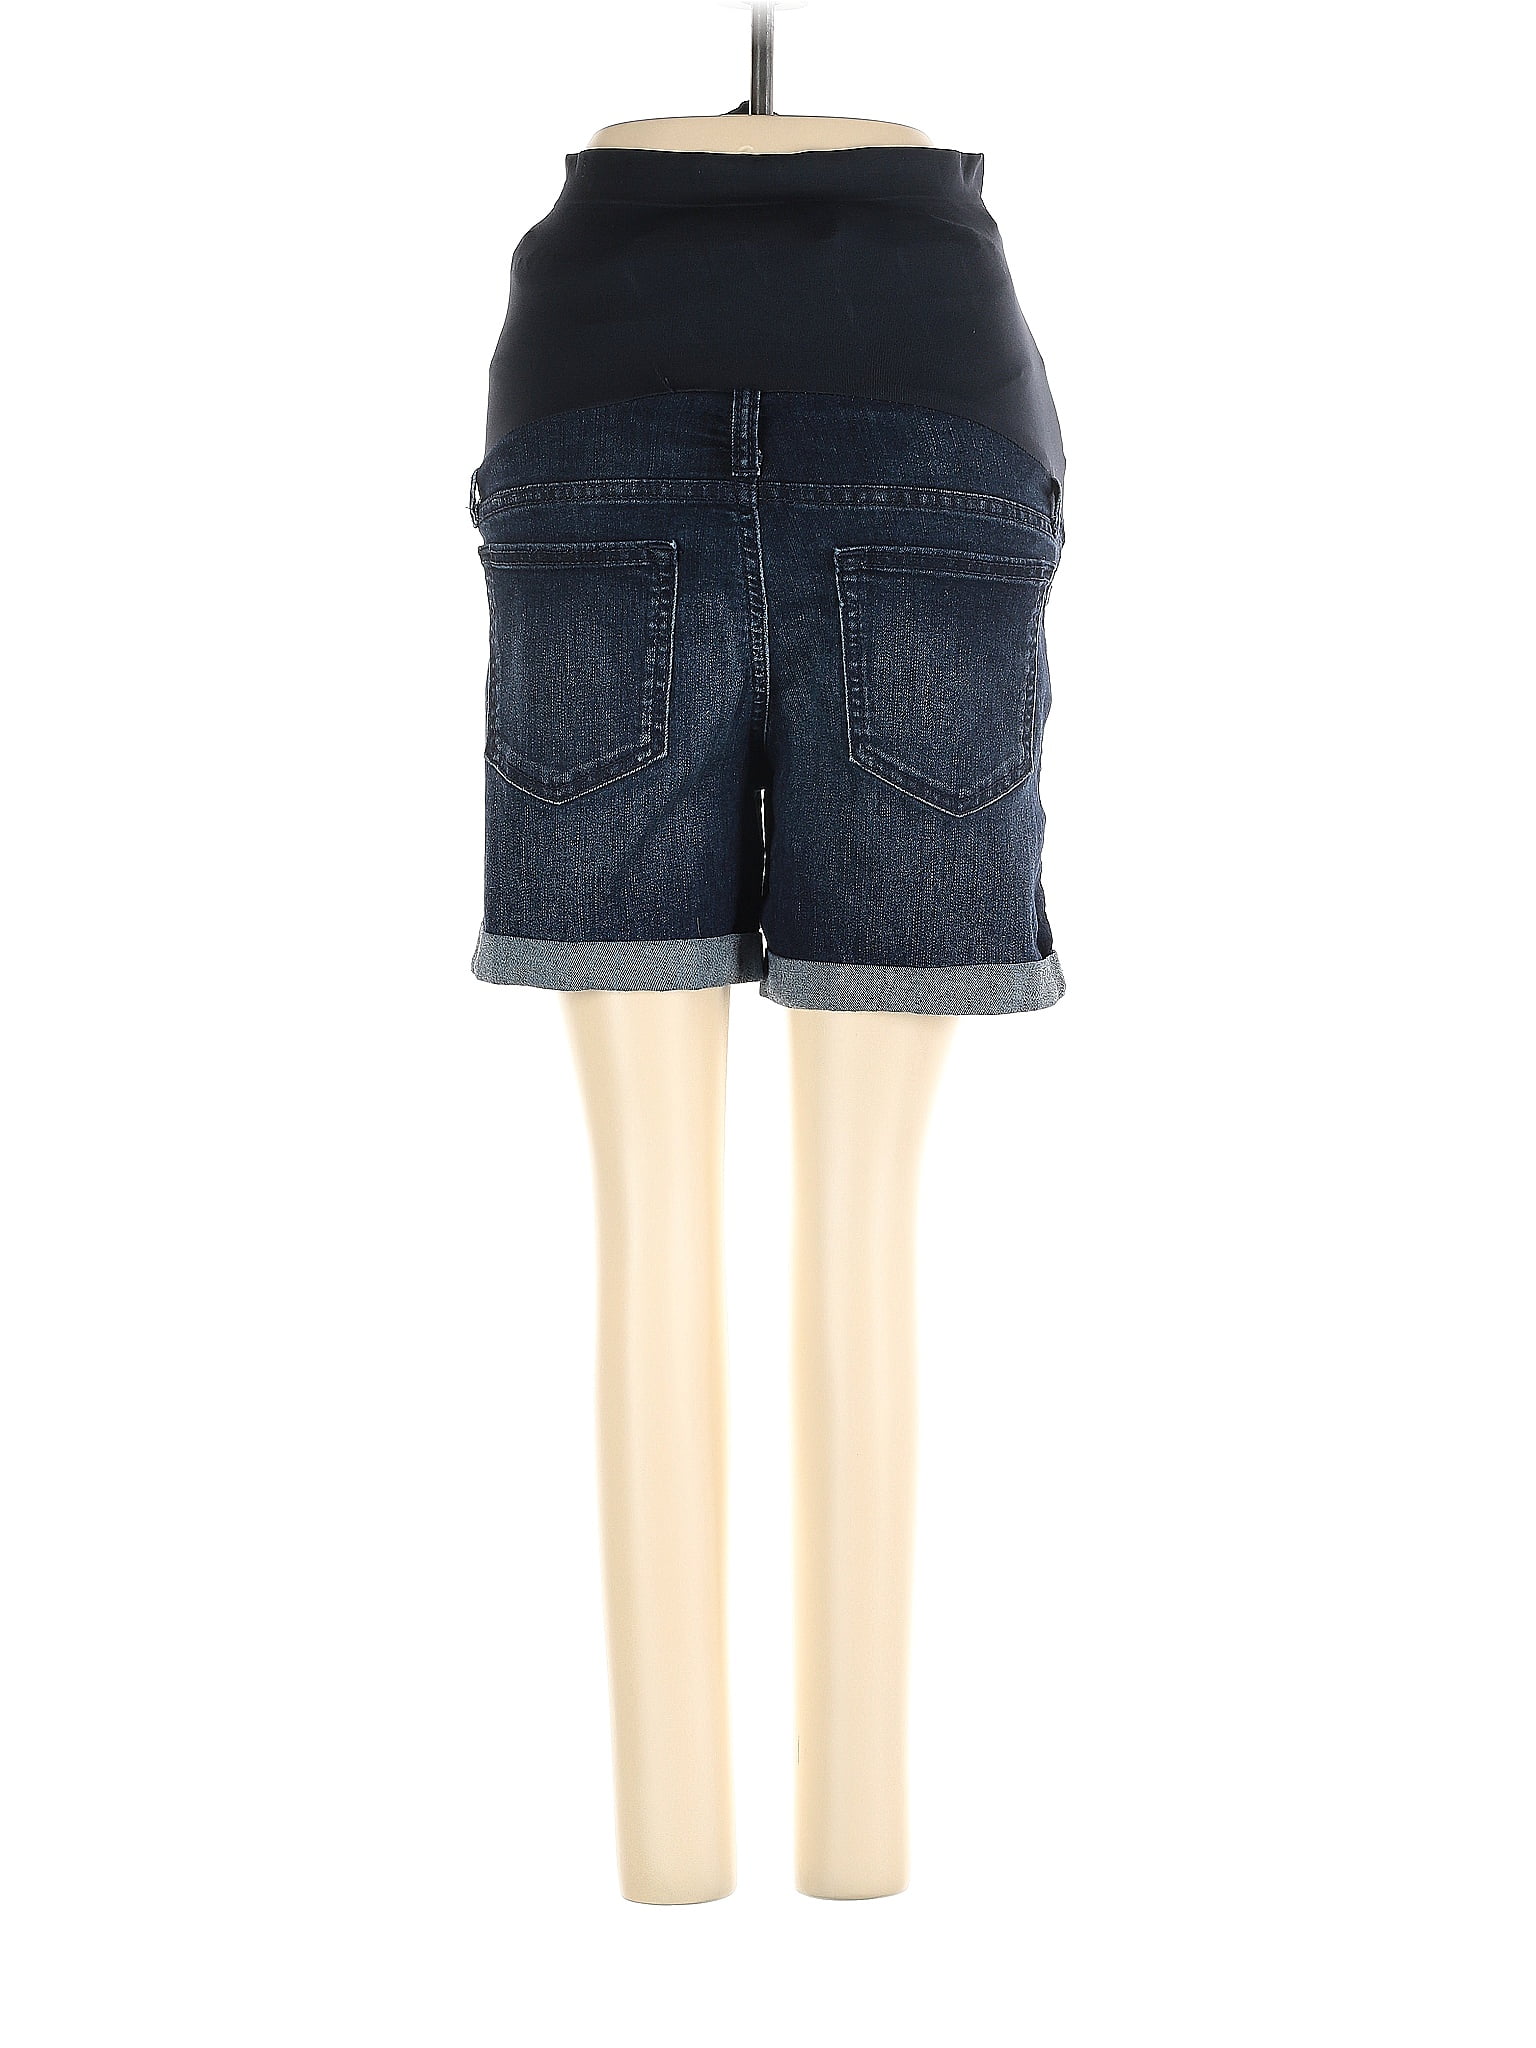 a:glow Solid Blue Denim Shorts Size 2 (Maternity) - 39% off